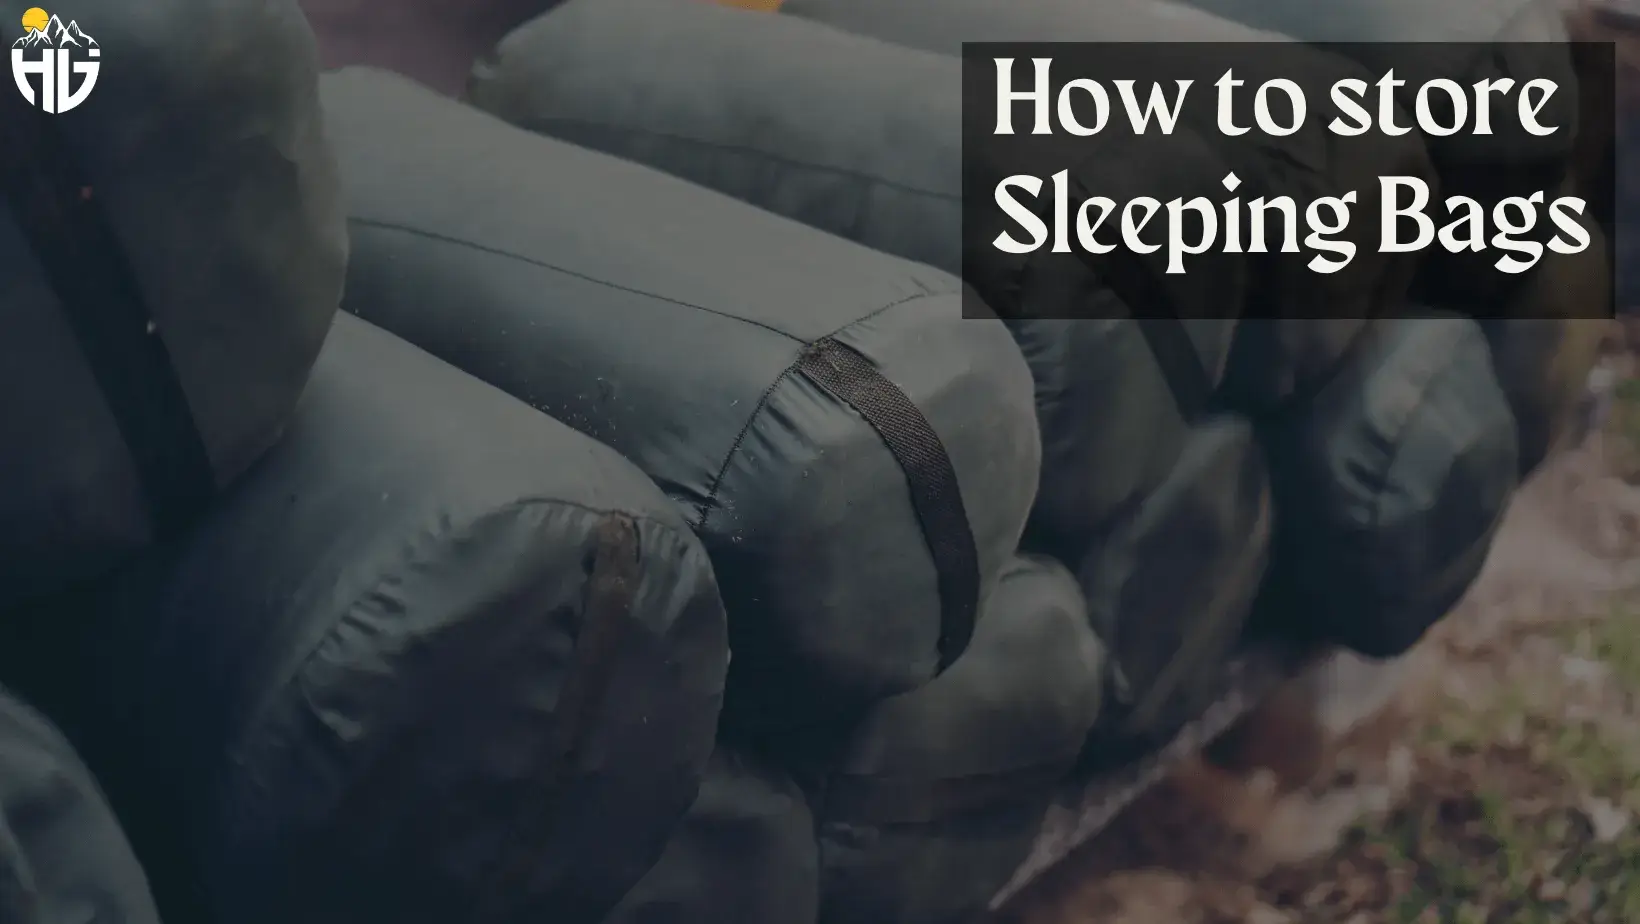 How to store Sleeping Bags